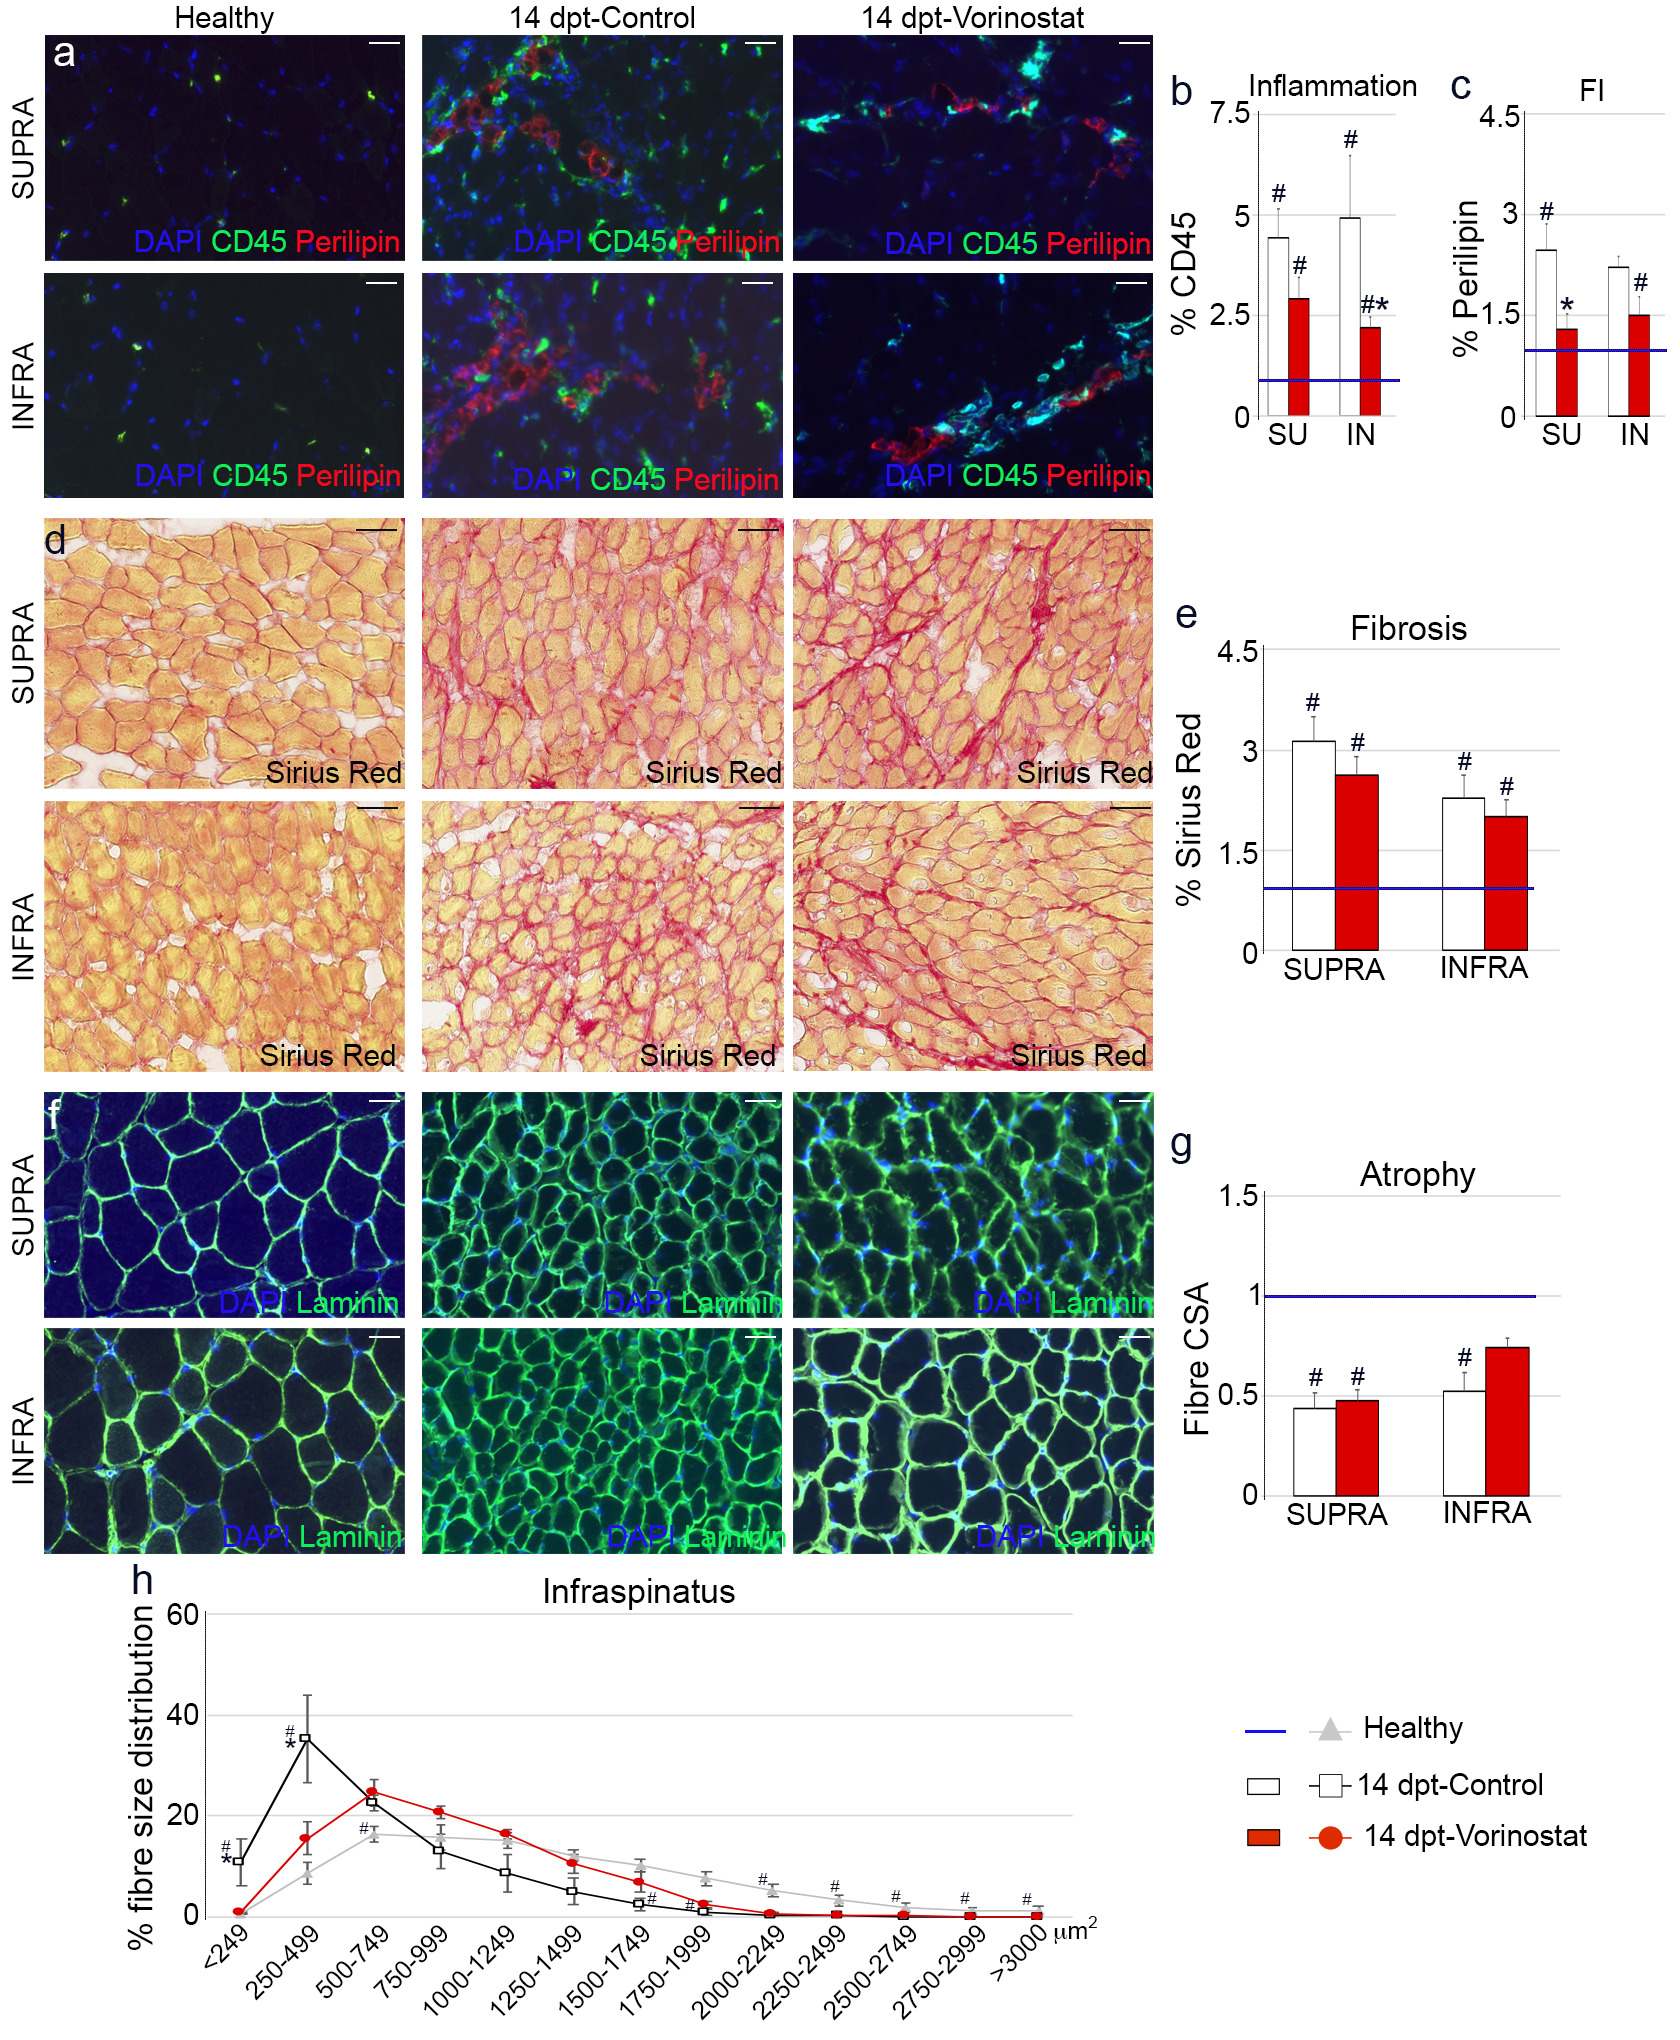 Fig. 4 
            Vorinostat reduces muscle degeneration after tenotomy. Representative images of immunostained muscle tissue sections for a) CD45/Perilipin, d) Sirius red, and f) laminin from healthy (n = 6) and injured mice, treated (n = 4) or not treated (n = 4) with vorinostat for 12 days, two days after rotator cuff (RC) injury. 4',6-diamidino-2-phenylindole (DAPI) was used to identify all nuclei. Scale bar, 10 μm. Graphs show the presence of b) cellular, c) fatty, and e) fibrotic accumulation in the muscles. g) Mean cross-sectional area of the supra- and infraspinatus muscles from healthy and vorinostat-treated and untreated injured mice. h) Fibre size distribution of the infraspinatus muscles from the different experimental conditions. Data were expressed as the mean and standard error of the mean, where expression levels were related to those found in healthy muscles, which were considered as 1 (blue line). *Significance between control and vorinostat-treated injured mice. ‘#’ defines significance between healthy and injured mice, where p < 0.05, Shapiro-Wilk test, Mann-Whitney U test, and independent-samples t-test. dpt, days post-tenotomy; FI, fatty infiltration; IN and INFRA, infraspinatus; SU and SUPRA, supraspinatus.
          